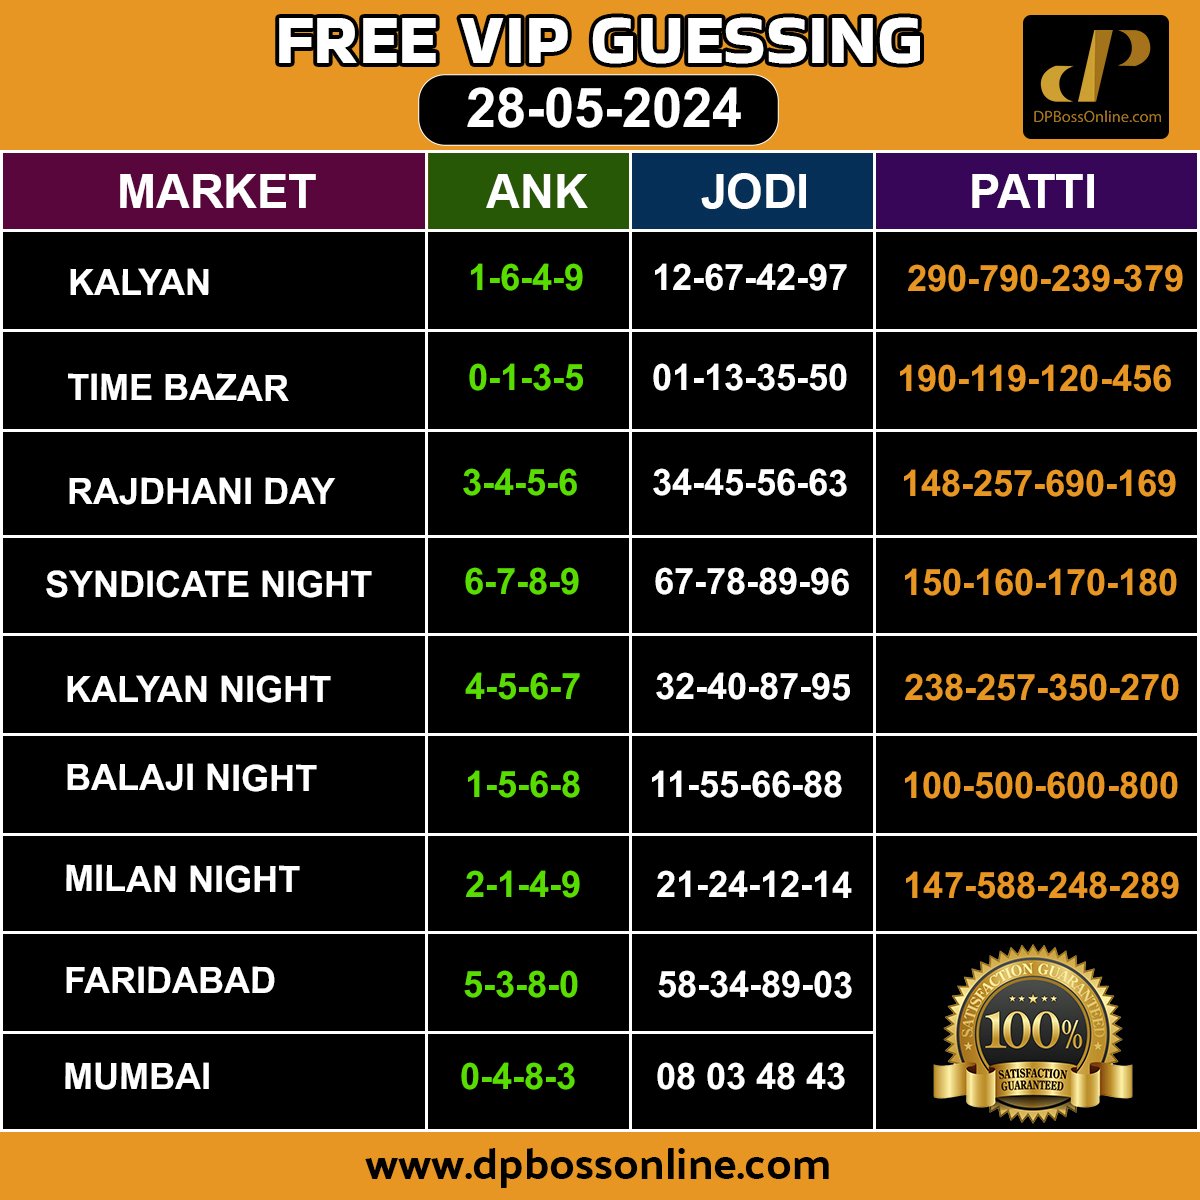 ✨✨28/ #May / 2024  FREE 100% #dpboss #SattaMatka #guessing DAILY.................✨✨
'
 '
 '
'
#BREAKING #T20WorldCup2024 #T20WorldCup #TeamIndia #casino #casinogames #T20Cricket #teenpatti #smgame #memes